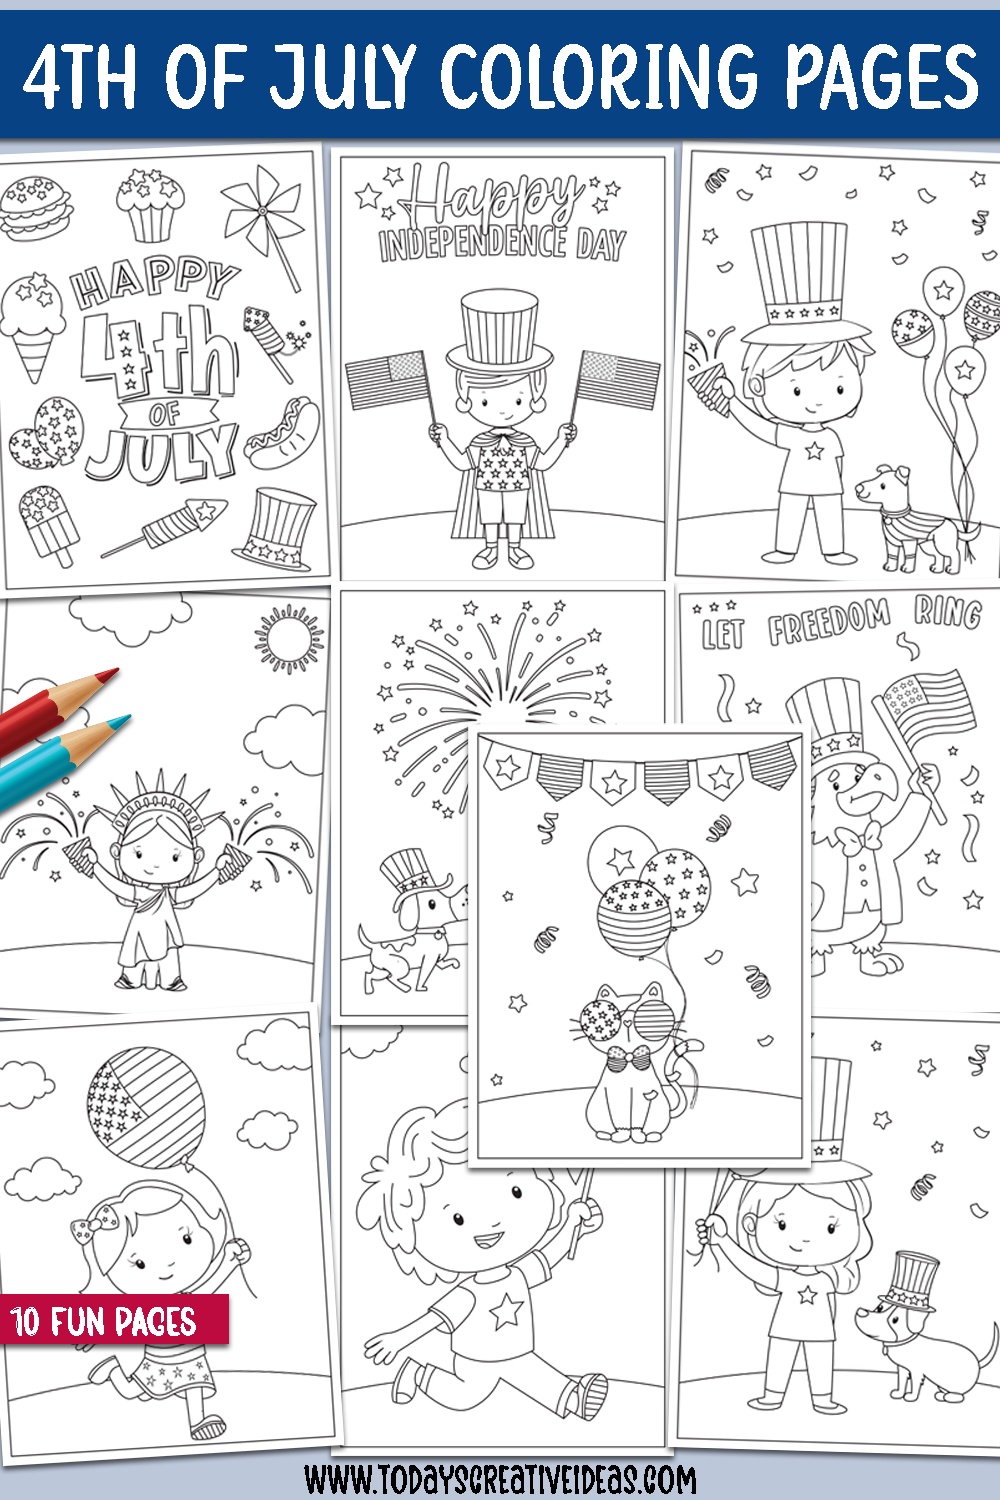 Collage of 10 fun 4th of July Coloring Pages